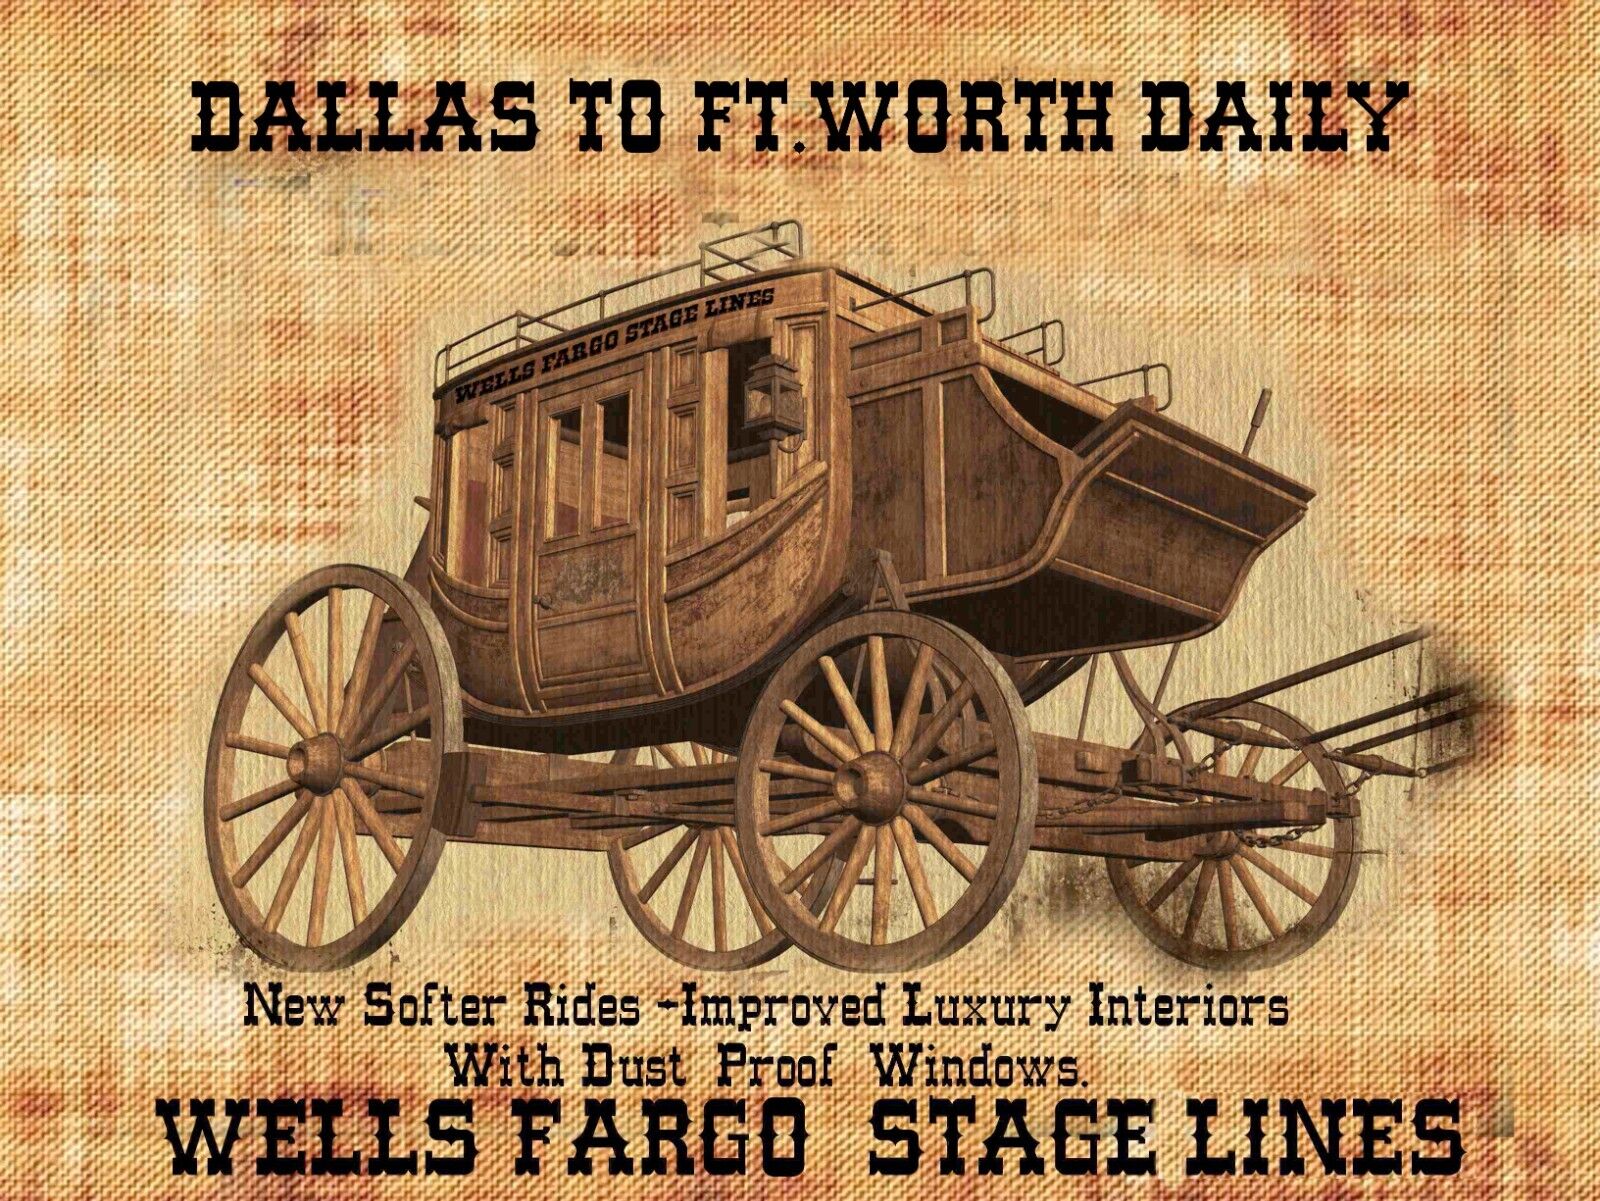 Old West Wells Fargo Stage lines Dallas to Ft Worth Mouse Pad   7 3/4  x 9\